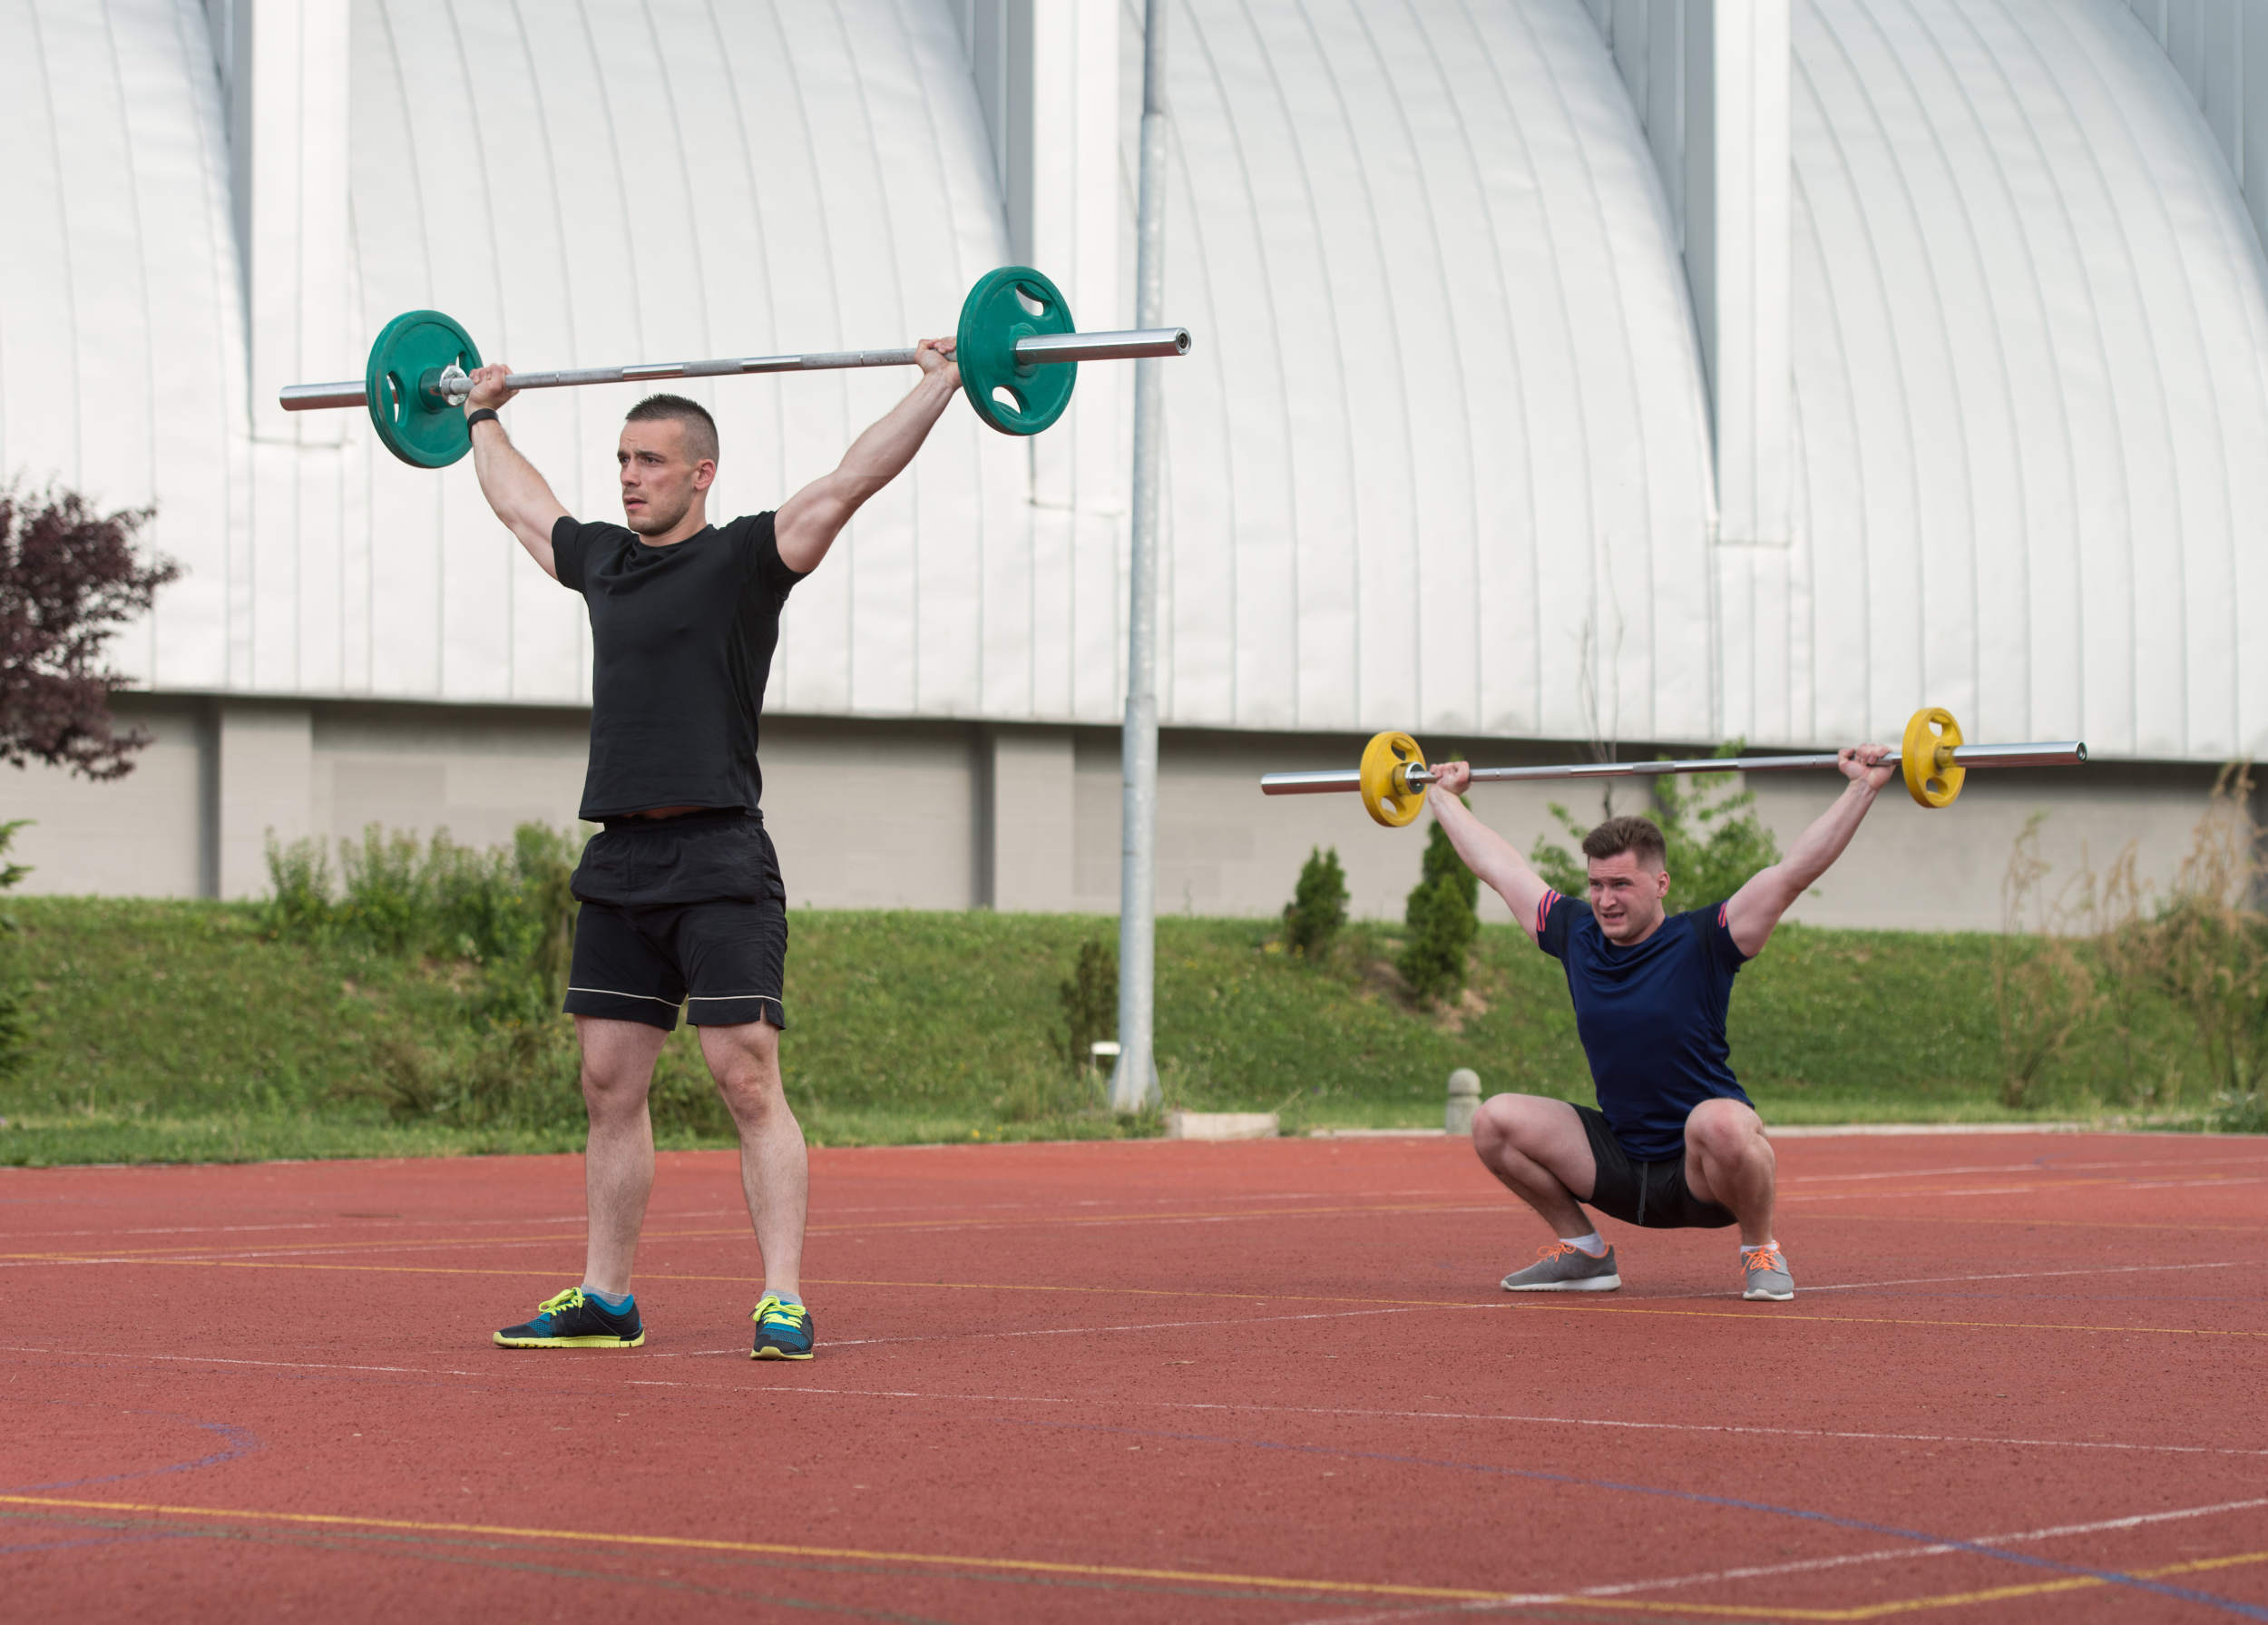 Olympic lifting outside on a track